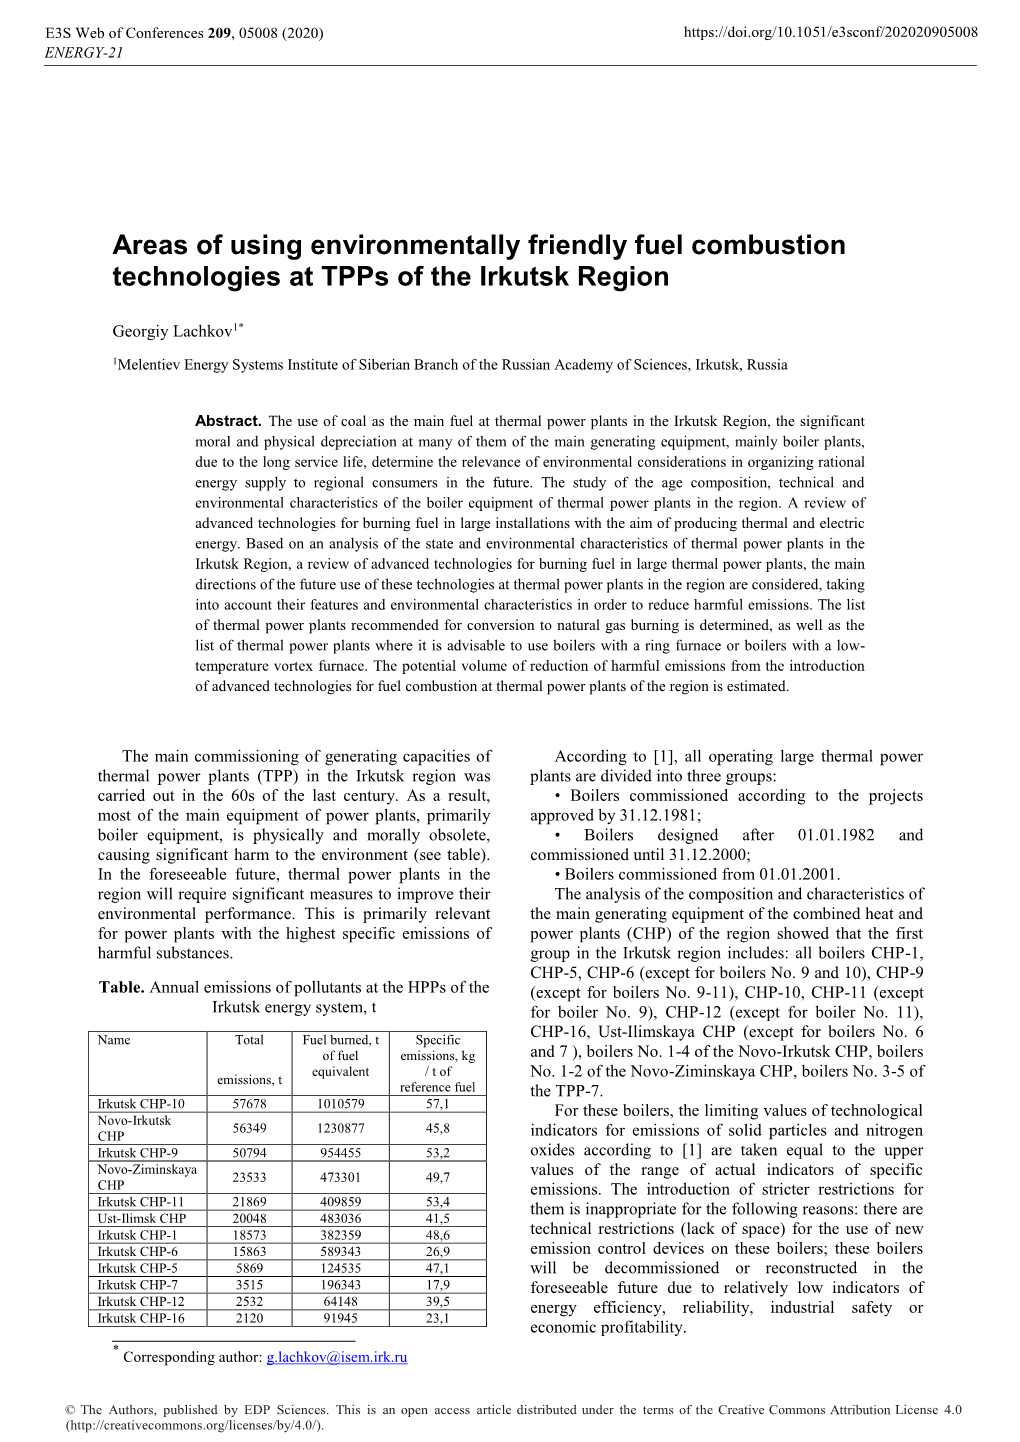 Areas of Using Environmentally Friendly Fuel Combustion Technologies at Tpps of the Irkutsk Region